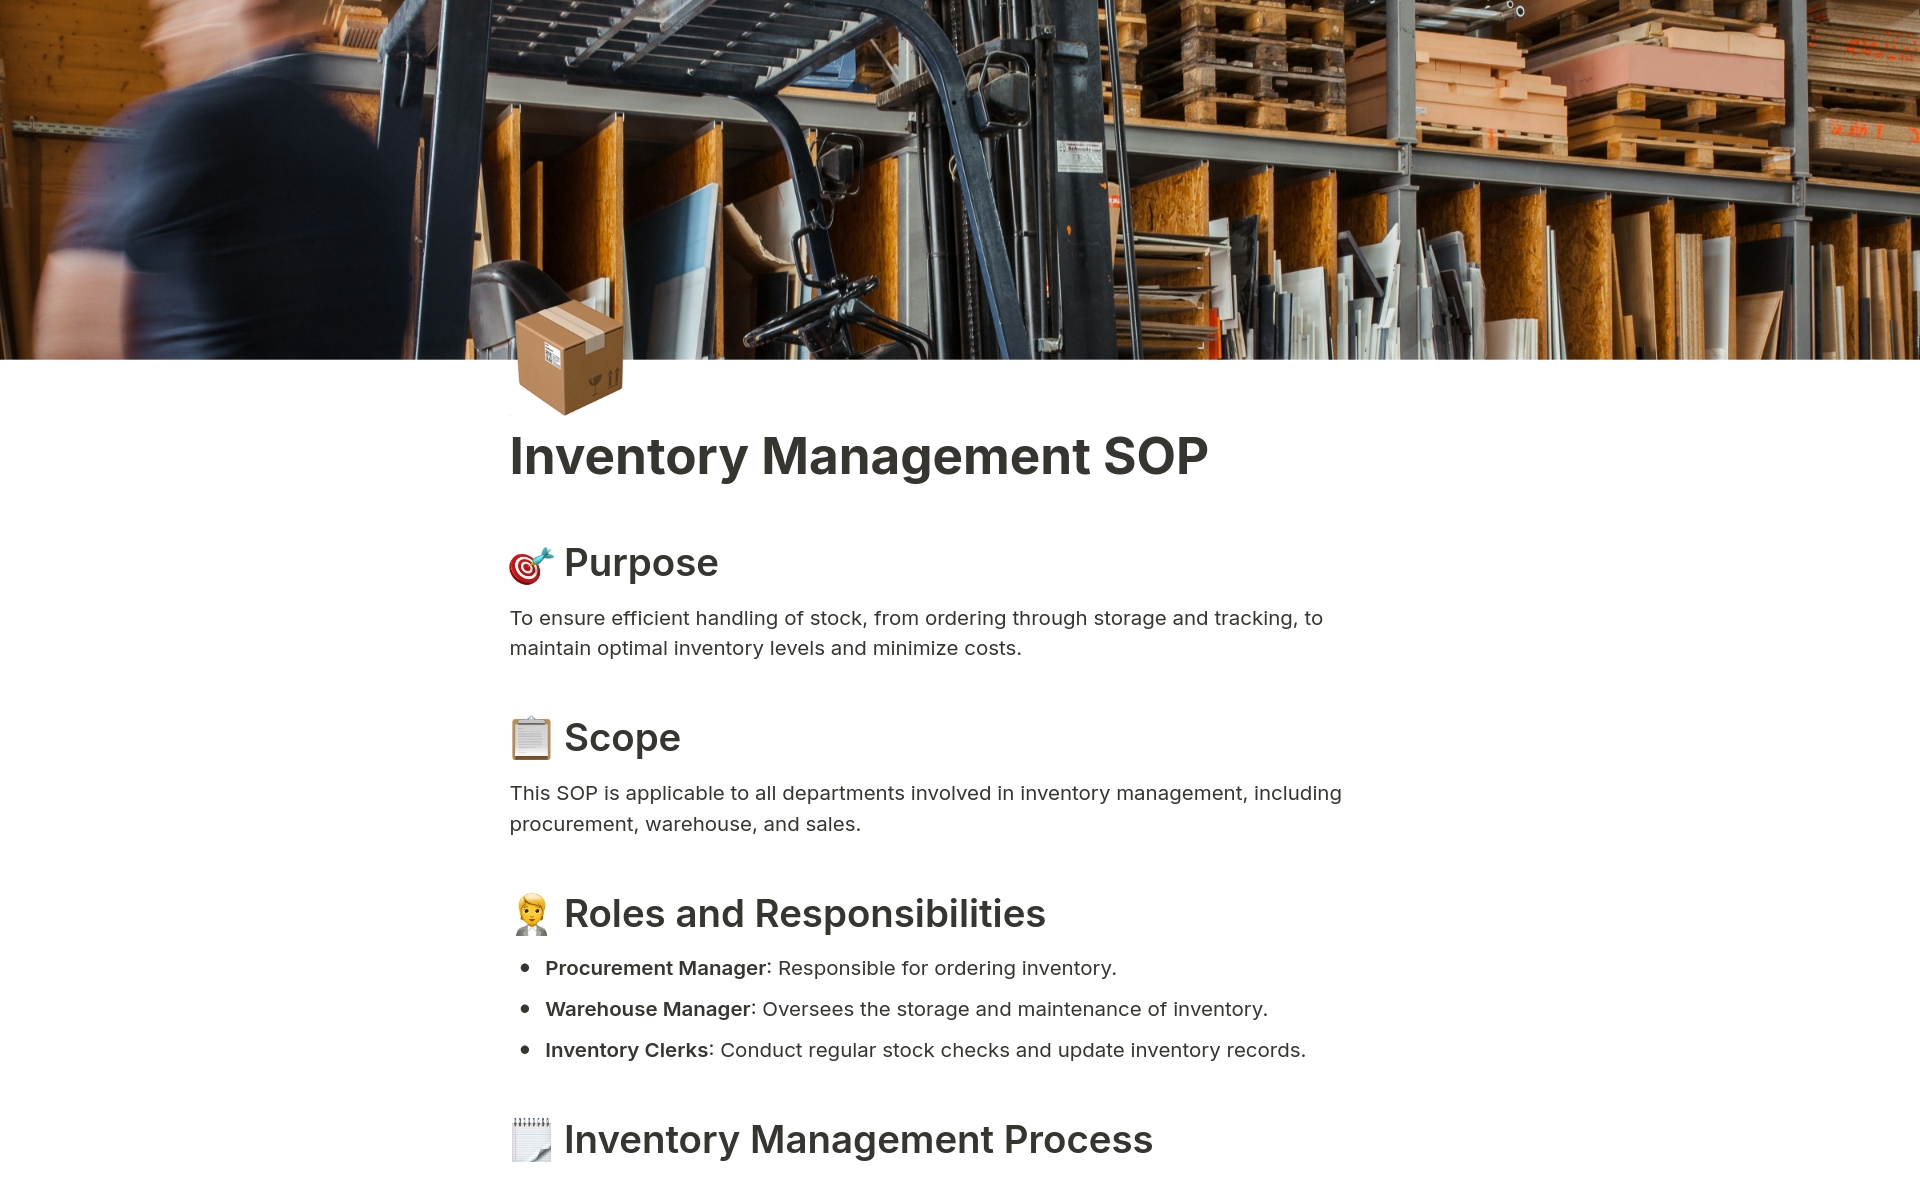 Efficiently manage your inventory with this SOP template, ensuring optimal stock levels and cost minimization across departments.